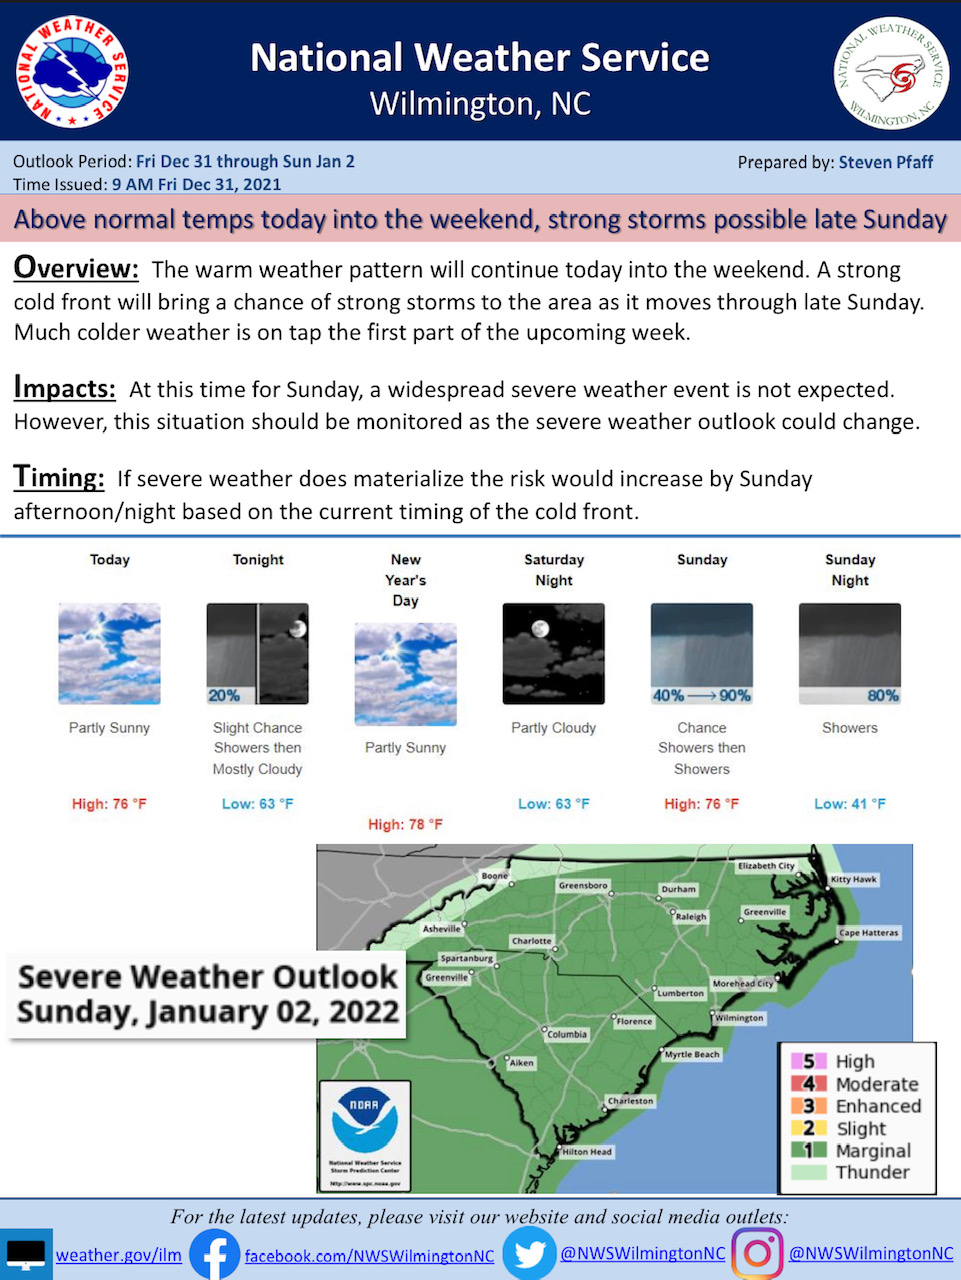 National Weather Service of Wilmington Weekend Weather Briefing